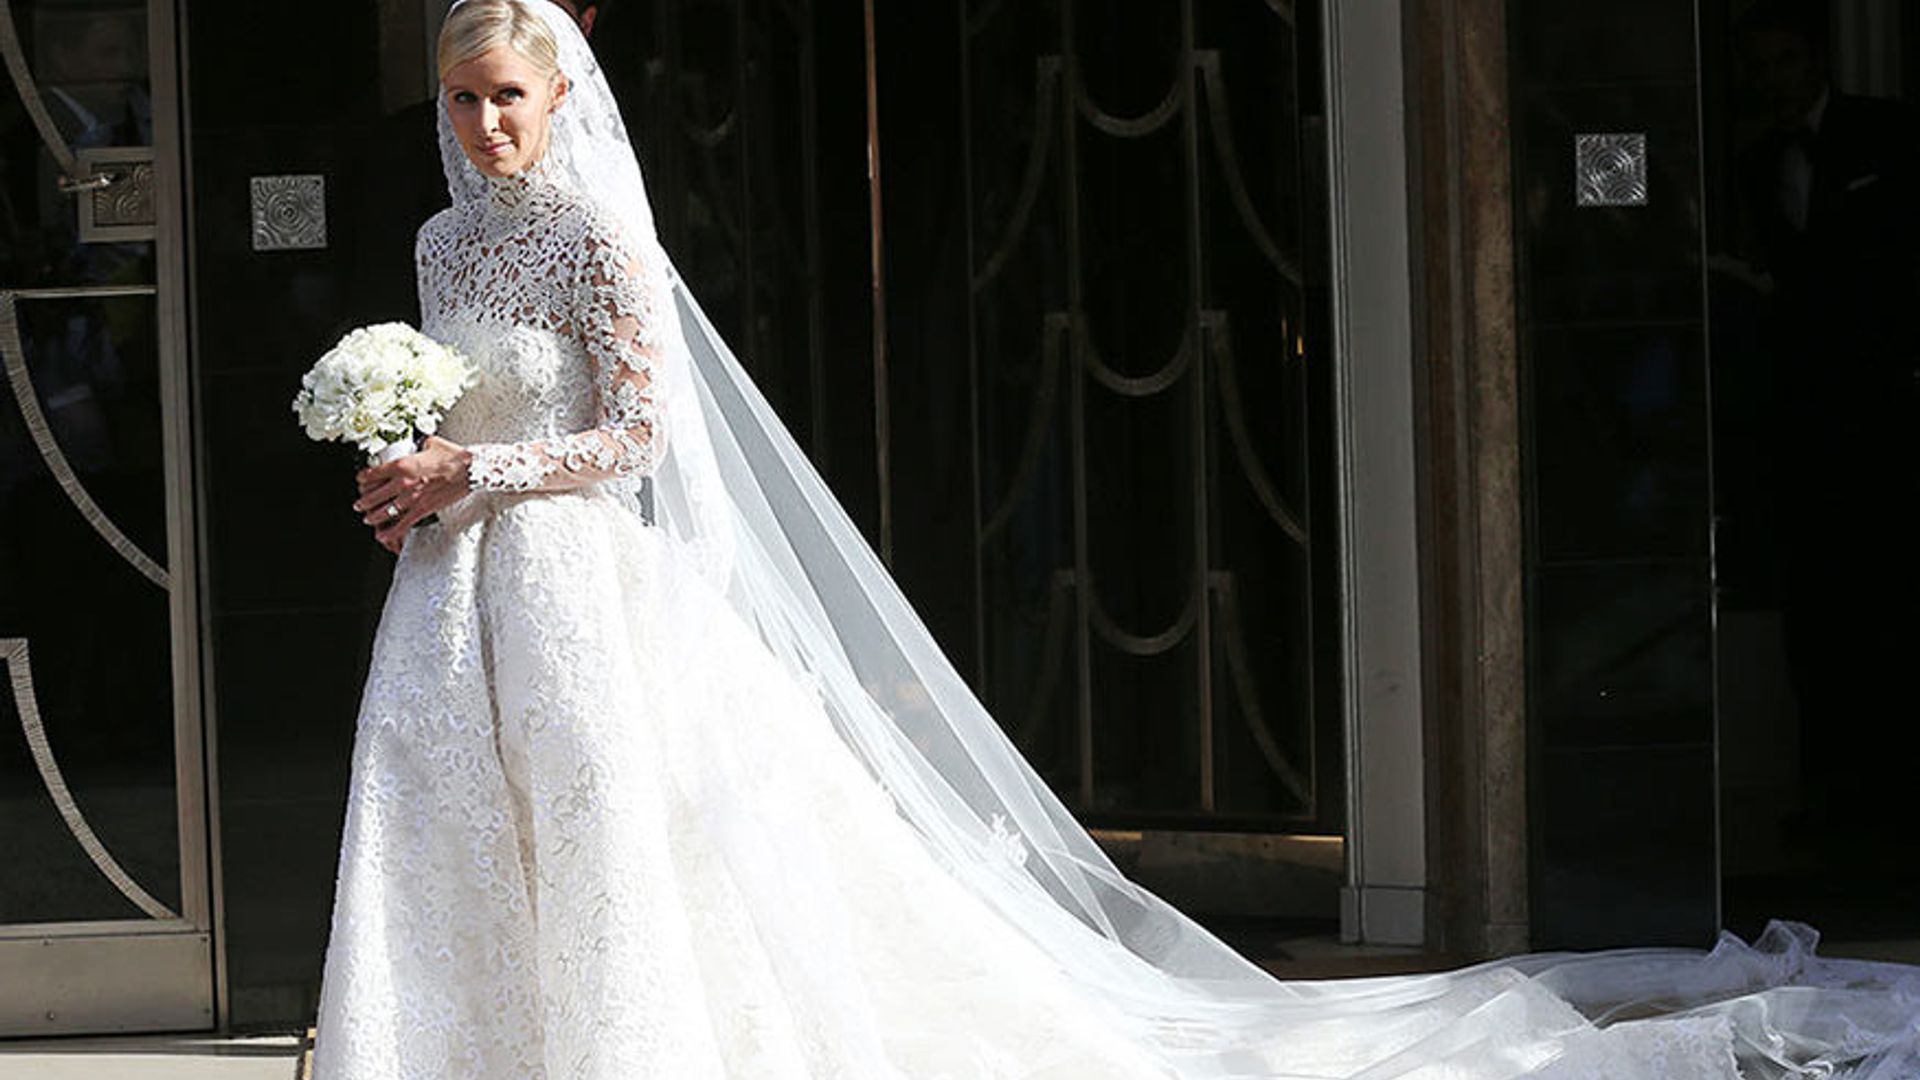 4-in-1 Grace Kelly Inspired Wedding Dress | Brides & Tailor